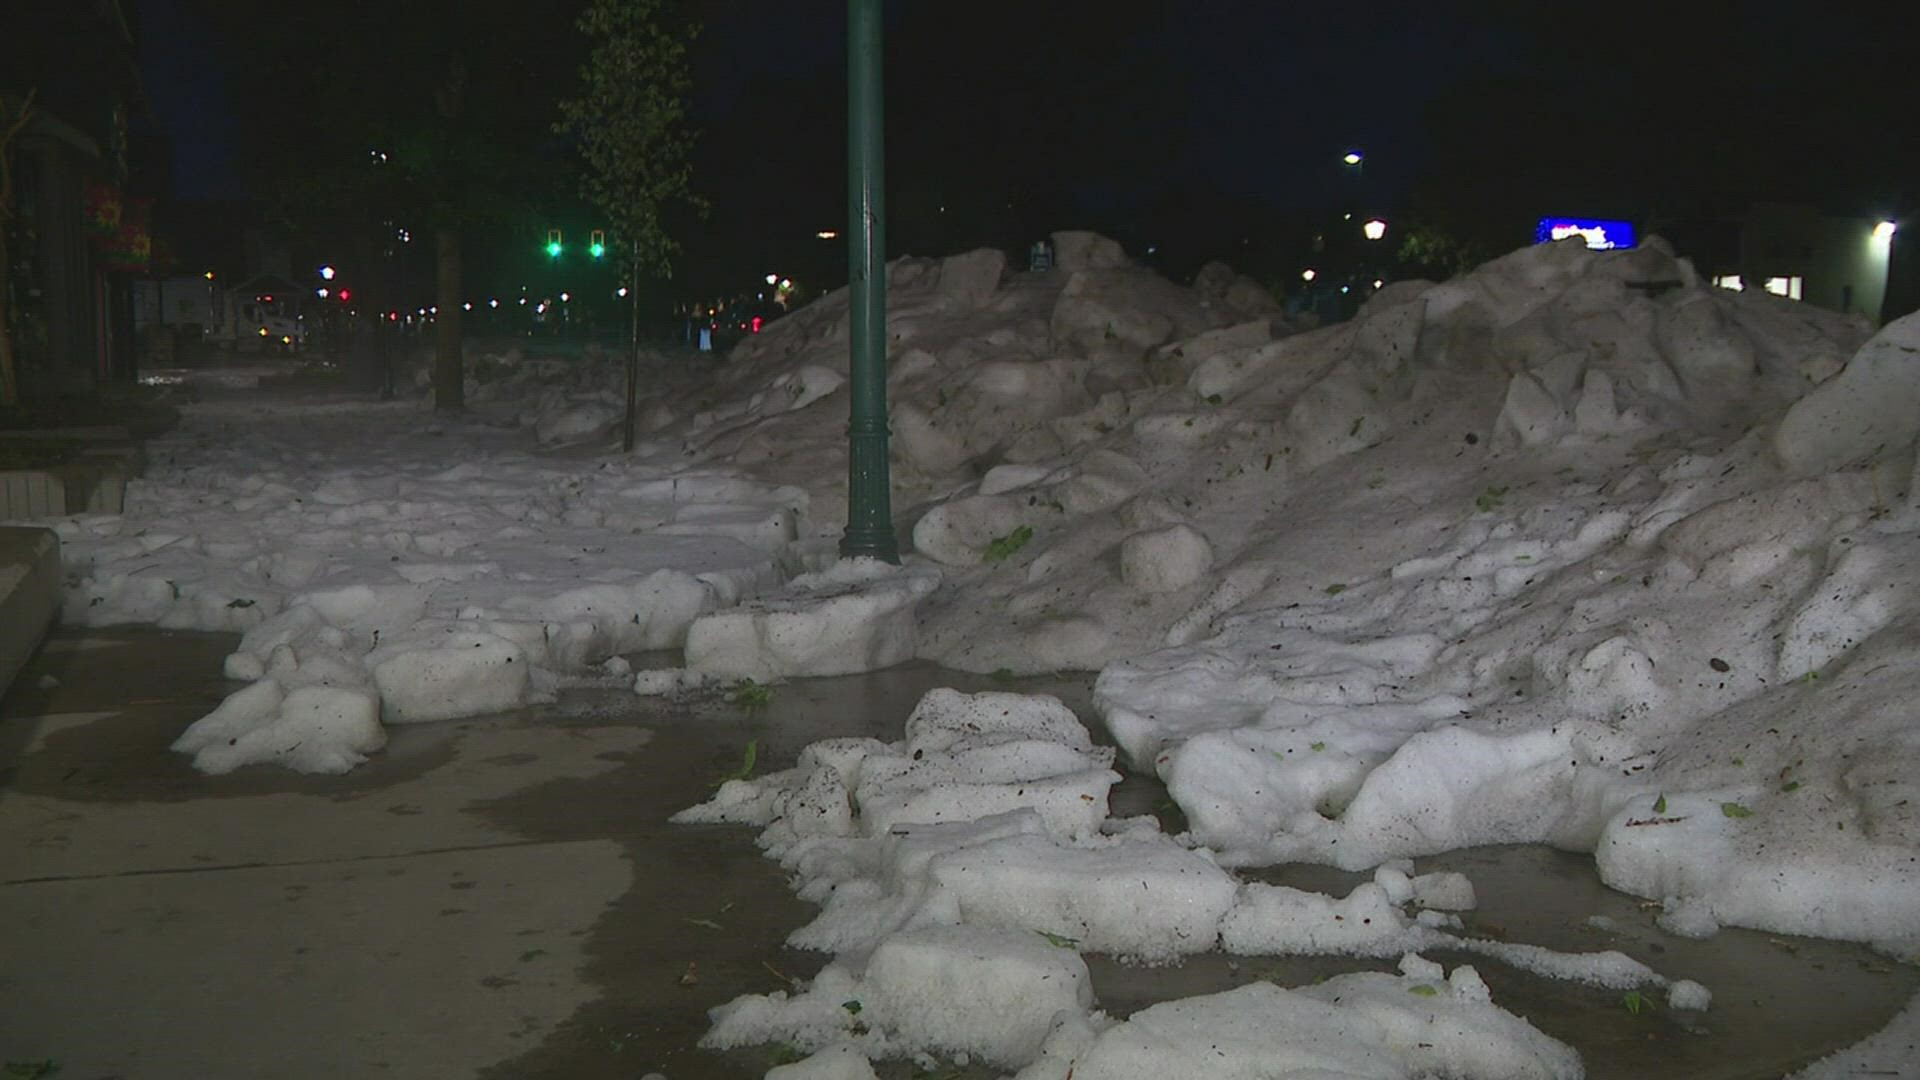 Crews in Estes Park, Colorado had to use heavy equipment to clear the roads after a large hail storm.